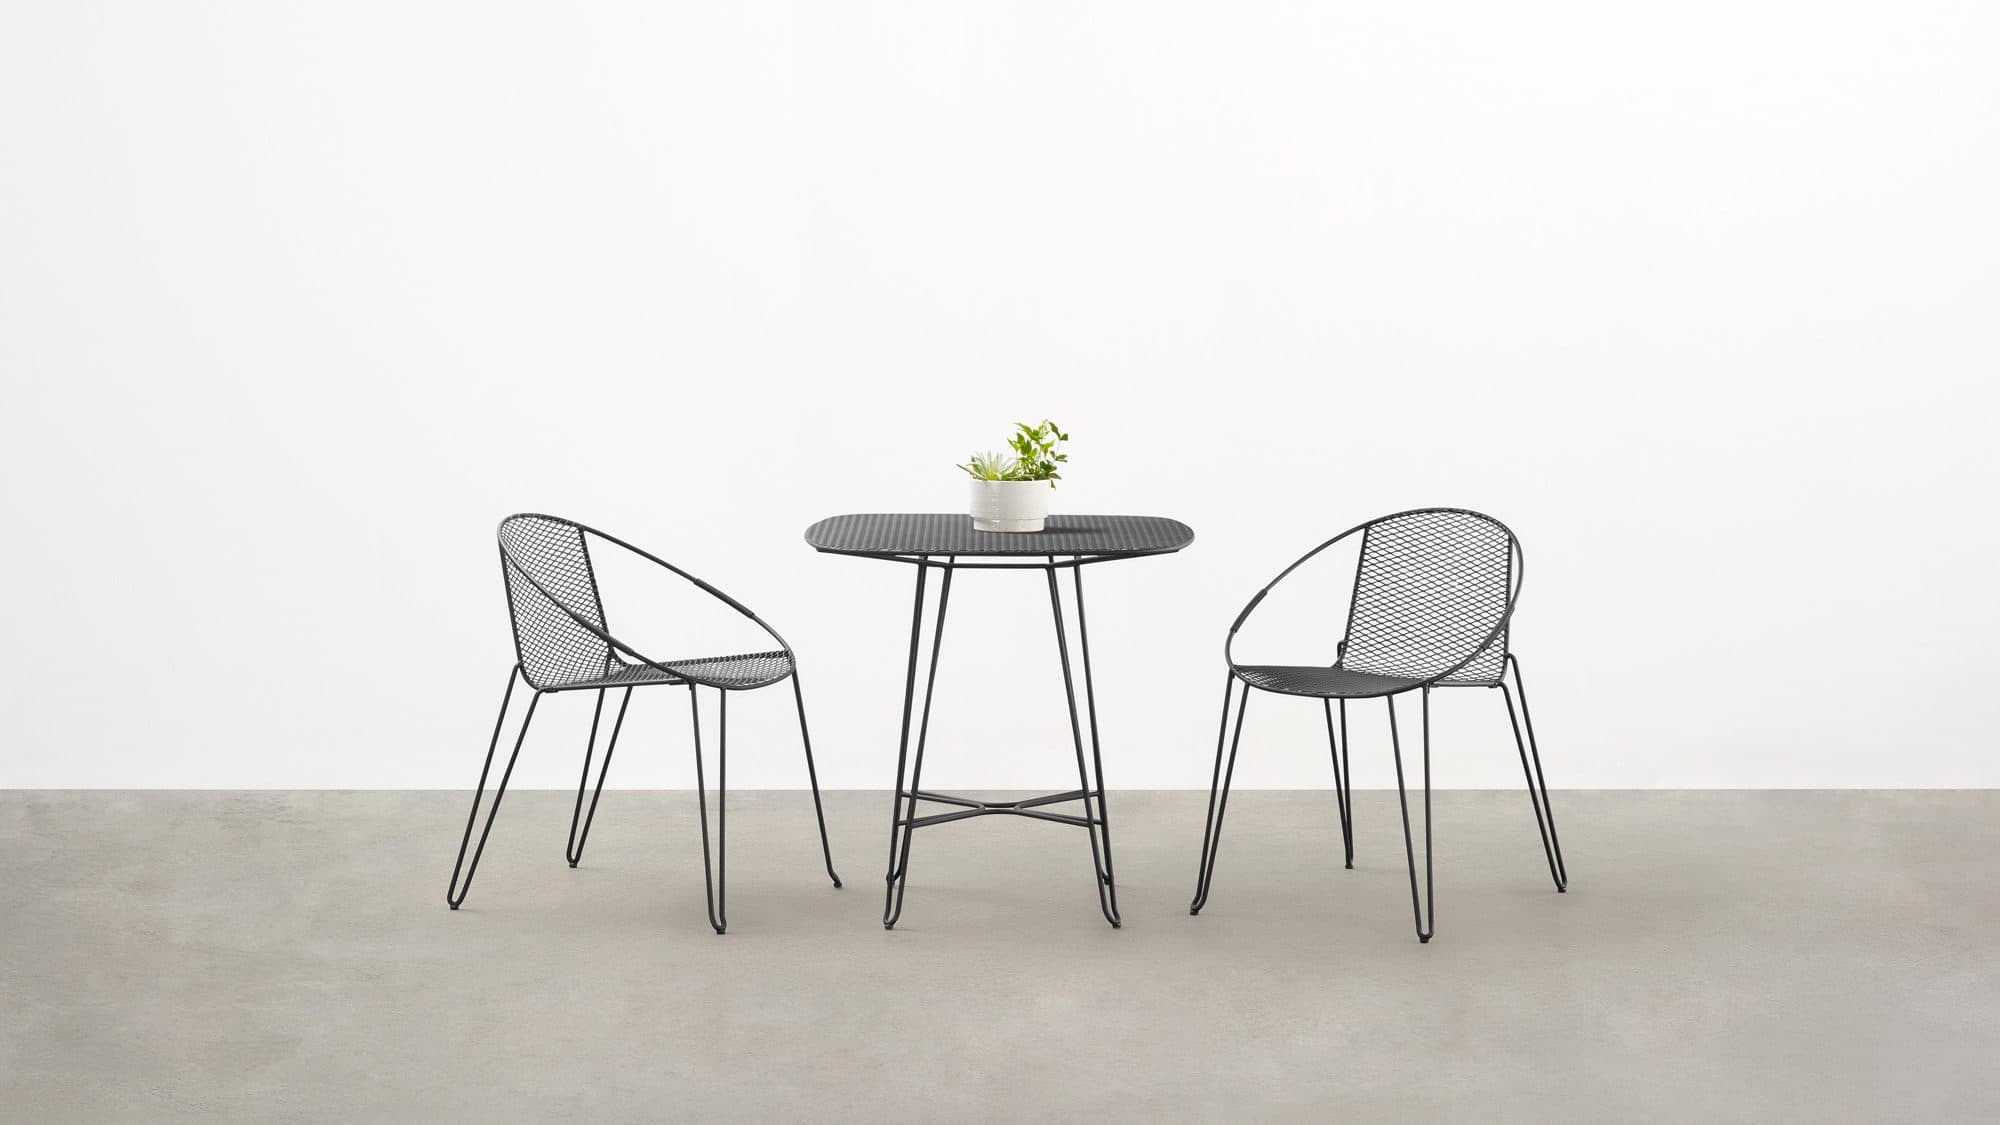 the Volley Chair - a modern outdoor dining chair with a distinct mid-century modern vibe designed by Adam Goodrum.